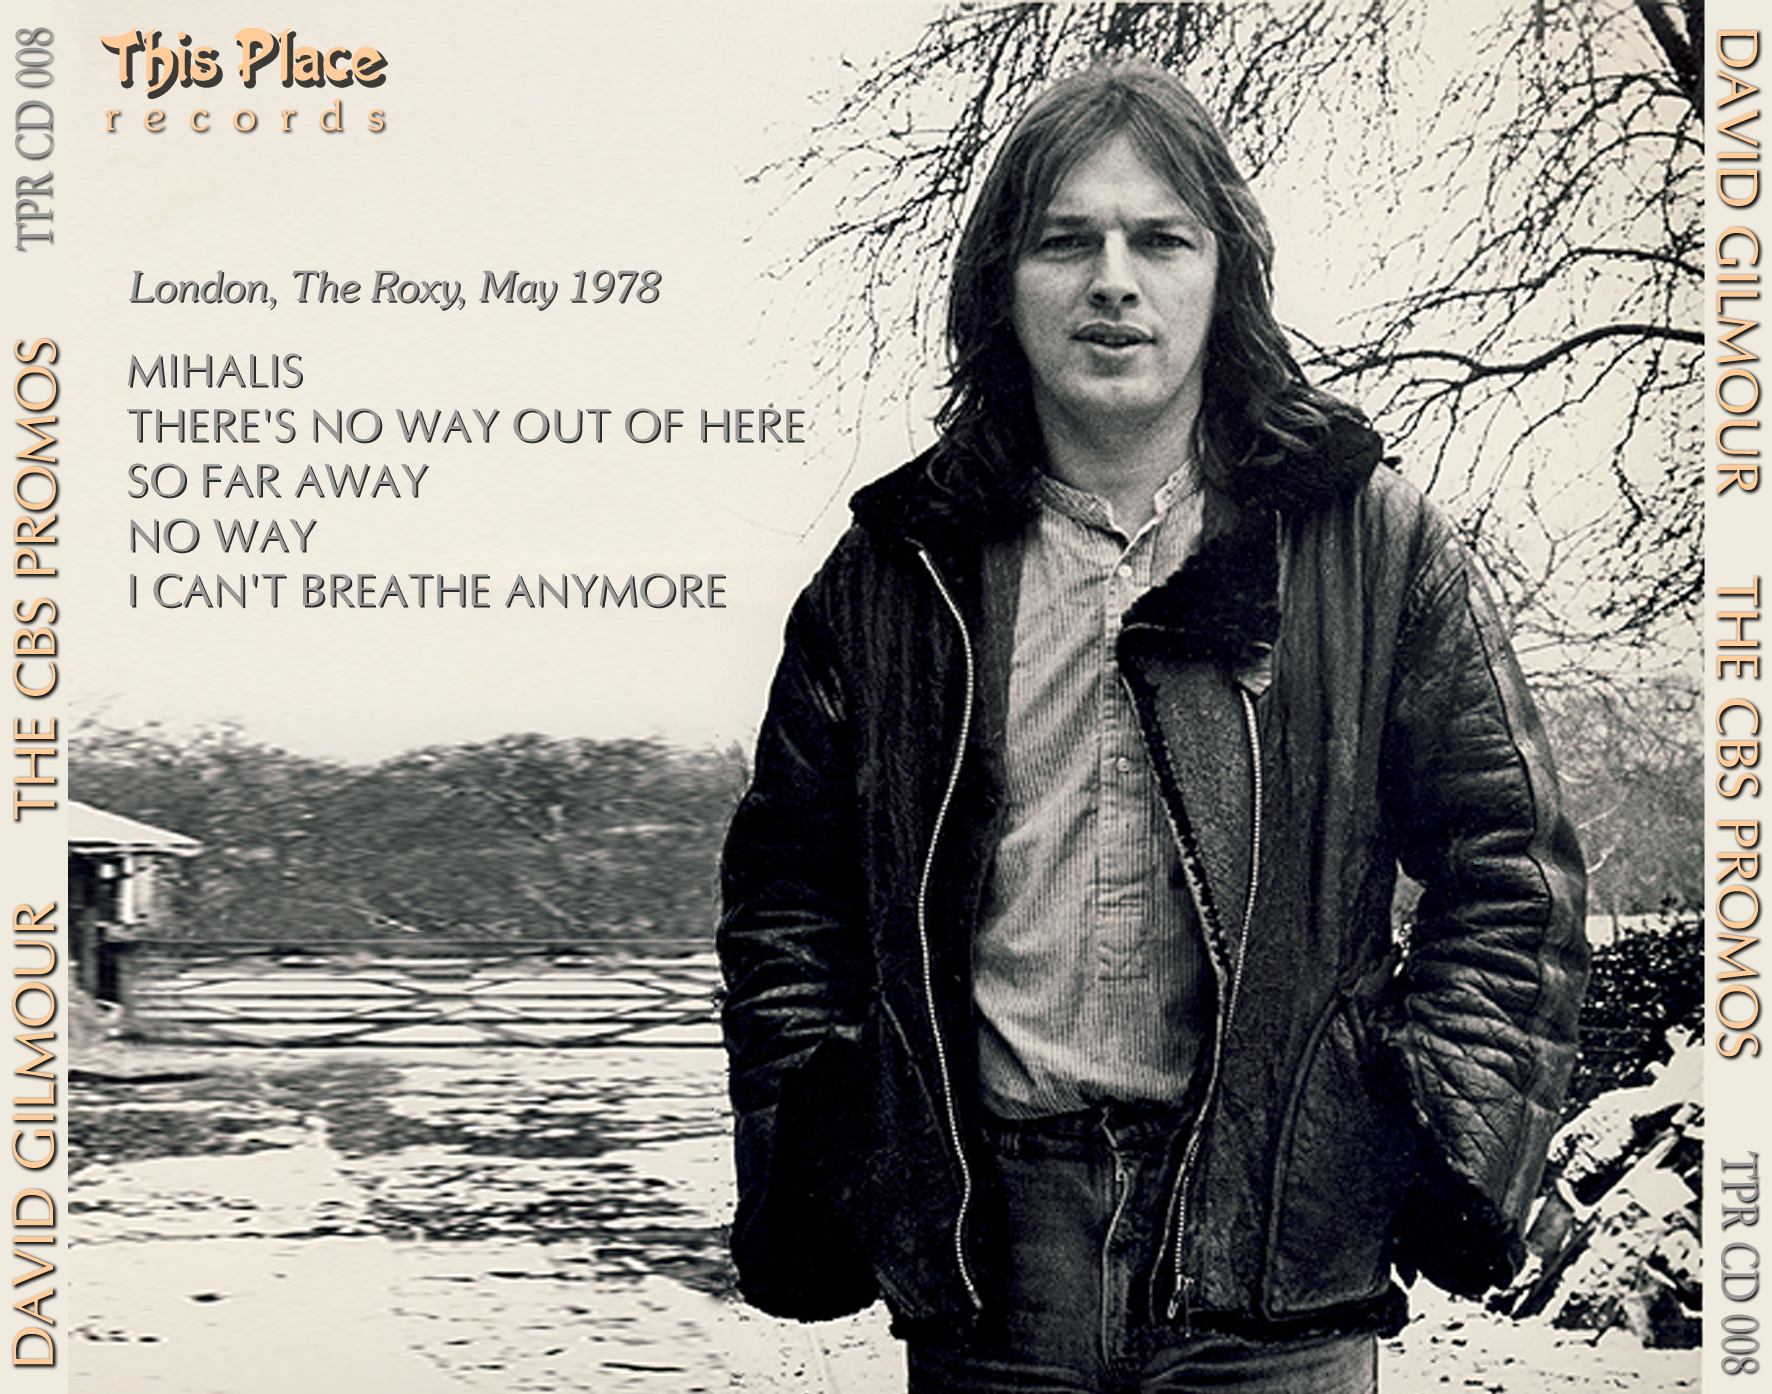 Out of this place. Дэвид Гилмор. Pink Floyd Дэвид Гилмор. David Gilmour 1978. Дэвид Гилмор в молодости.